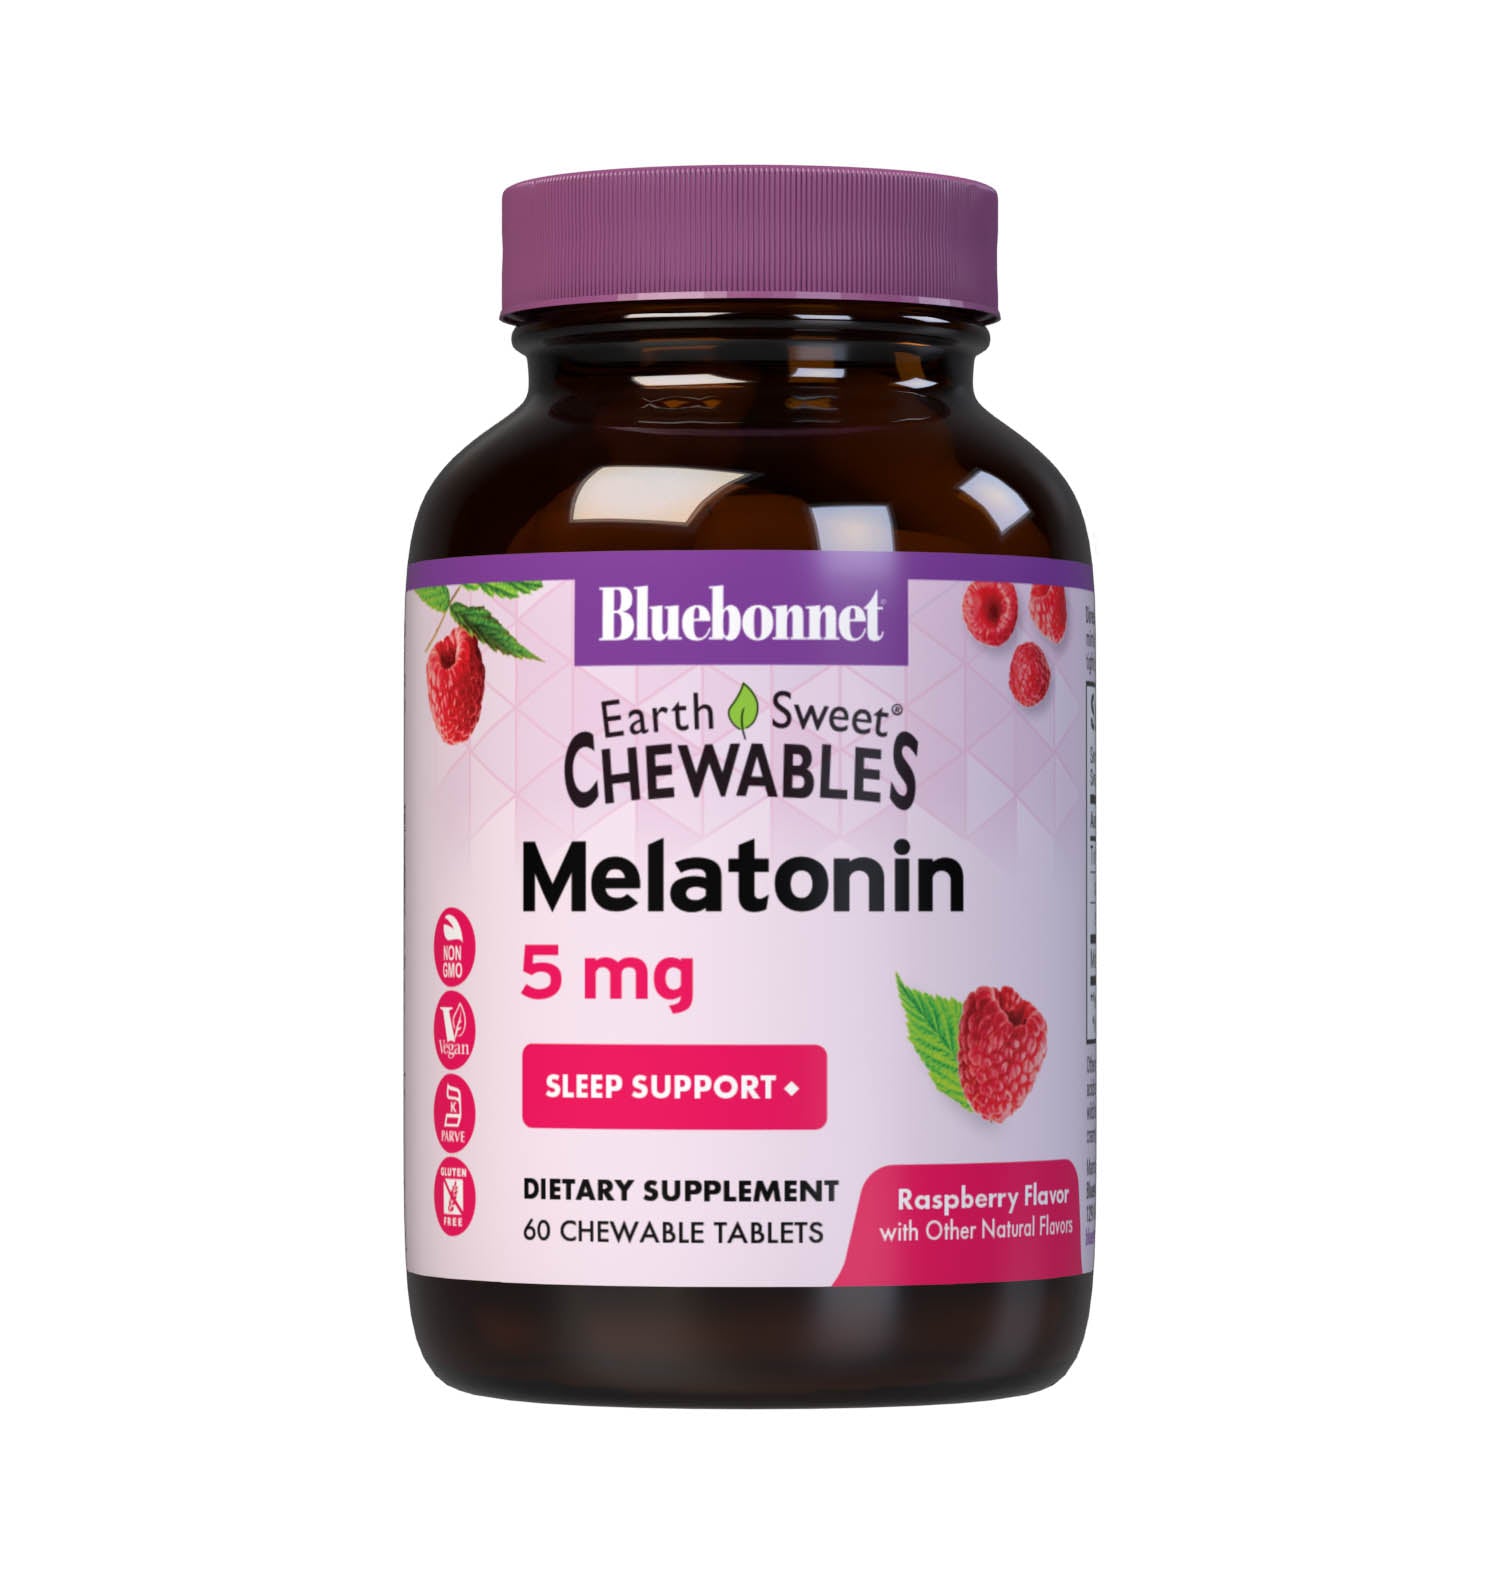 Bluebonnet’s EarthSweet Chewables Melatonin 5 mg 60 Tablets help minimize occasional sleeplessness for those affected by disturbed sleep/wake cycles, such as those traveling across multiple time zones. This product is sweetened with EarthSweet, a proprietary mix of fruit powders and sugar cane crystals. #size_60 count